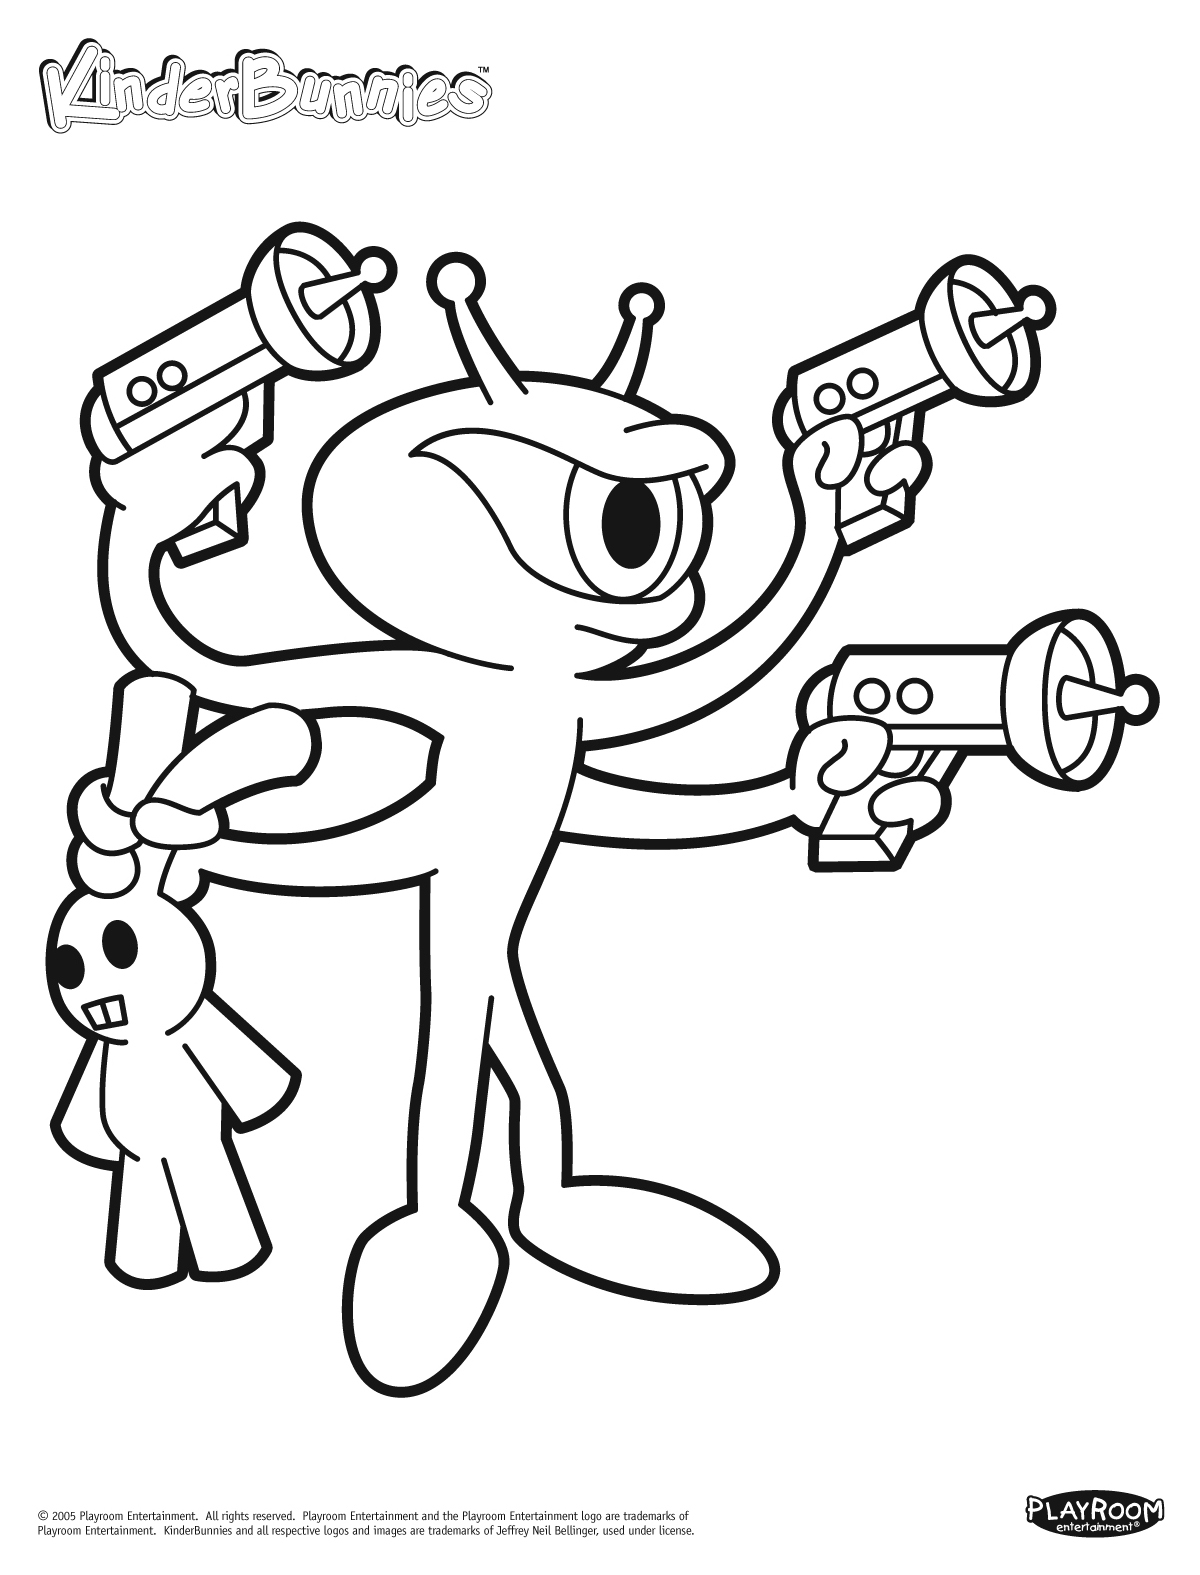 ufo coloring pages for kids - photo #36